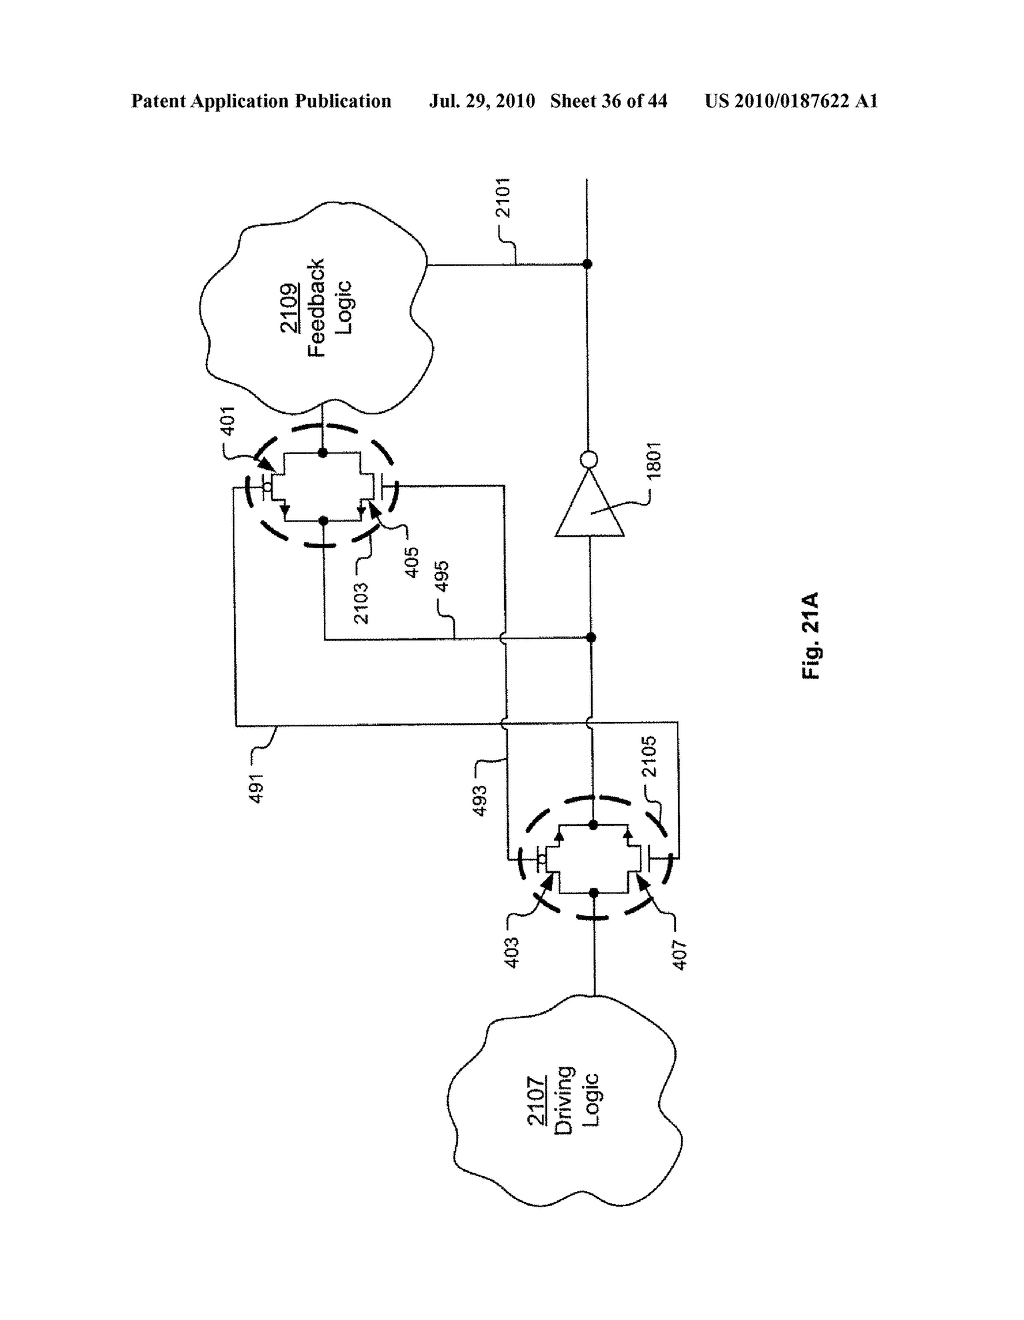 Linear Gate Level Cross-Coupled Transistor Device with Complimentary Pairs of Cross-Coupled Transistors Defined by Physically Separate Gate Electrodes within Gate Electrode Level - diagram, schematic, and image 37